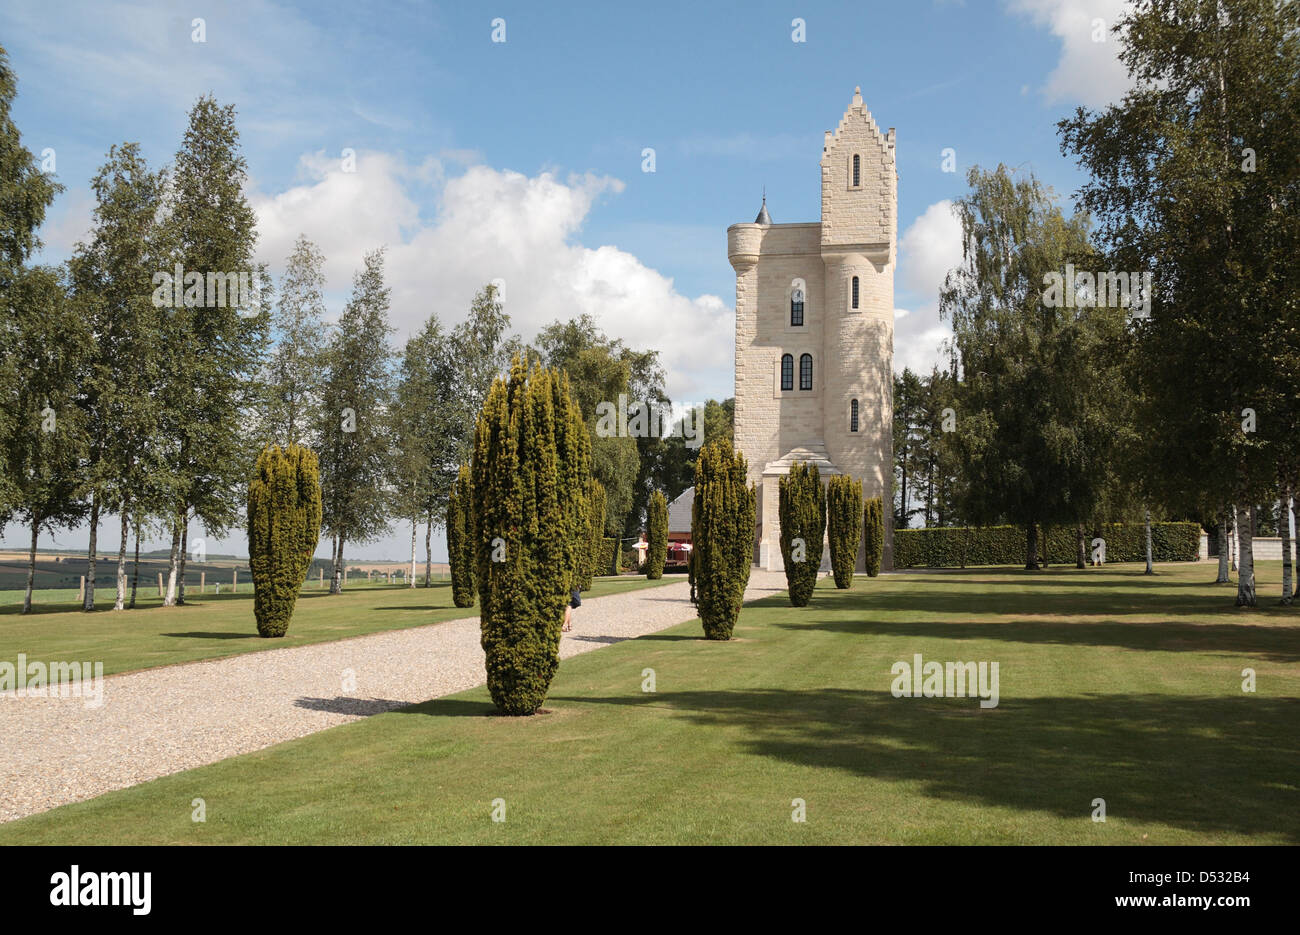 The beautiful Ulster Tower memorial and grounds, Thiepval, Somme, Picardy, France. Stock Photo